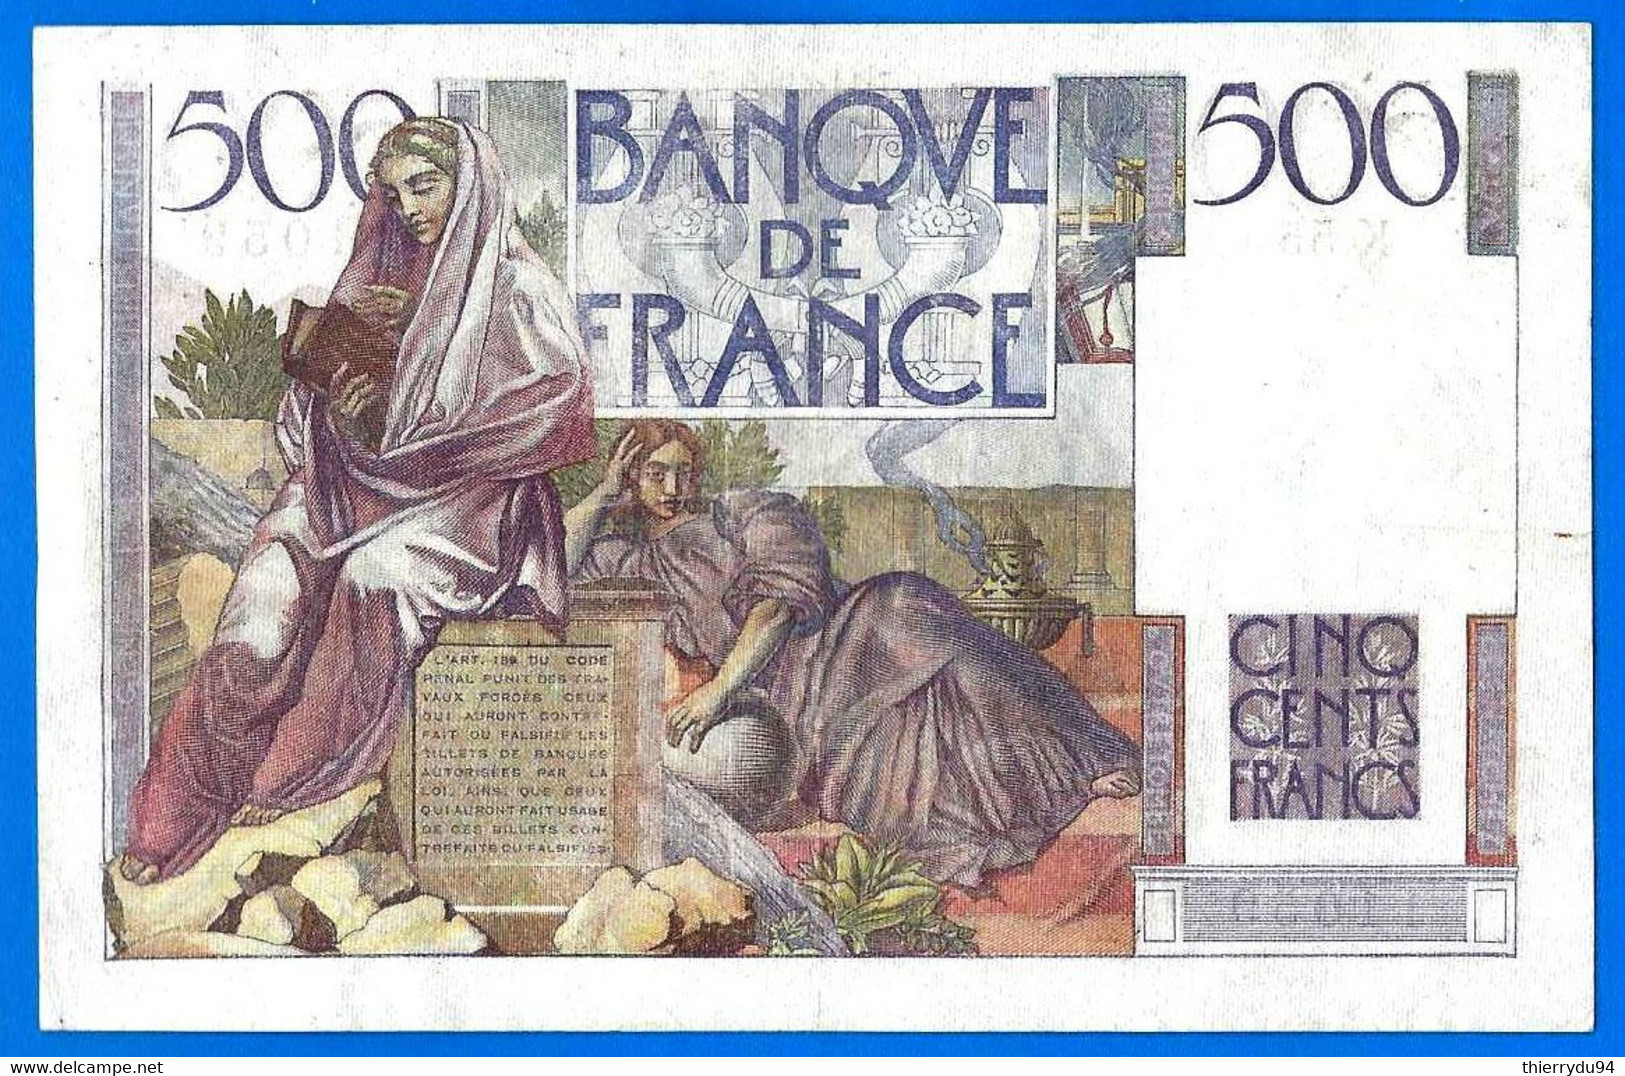 France 500 Francs 1945 Chateaubriand Serie K 55 Du 7 11 1945  Frcs Frc Frs Europe Paypal Bitcoin OK - 500 F 1945-1953 ''Chateaubriand''